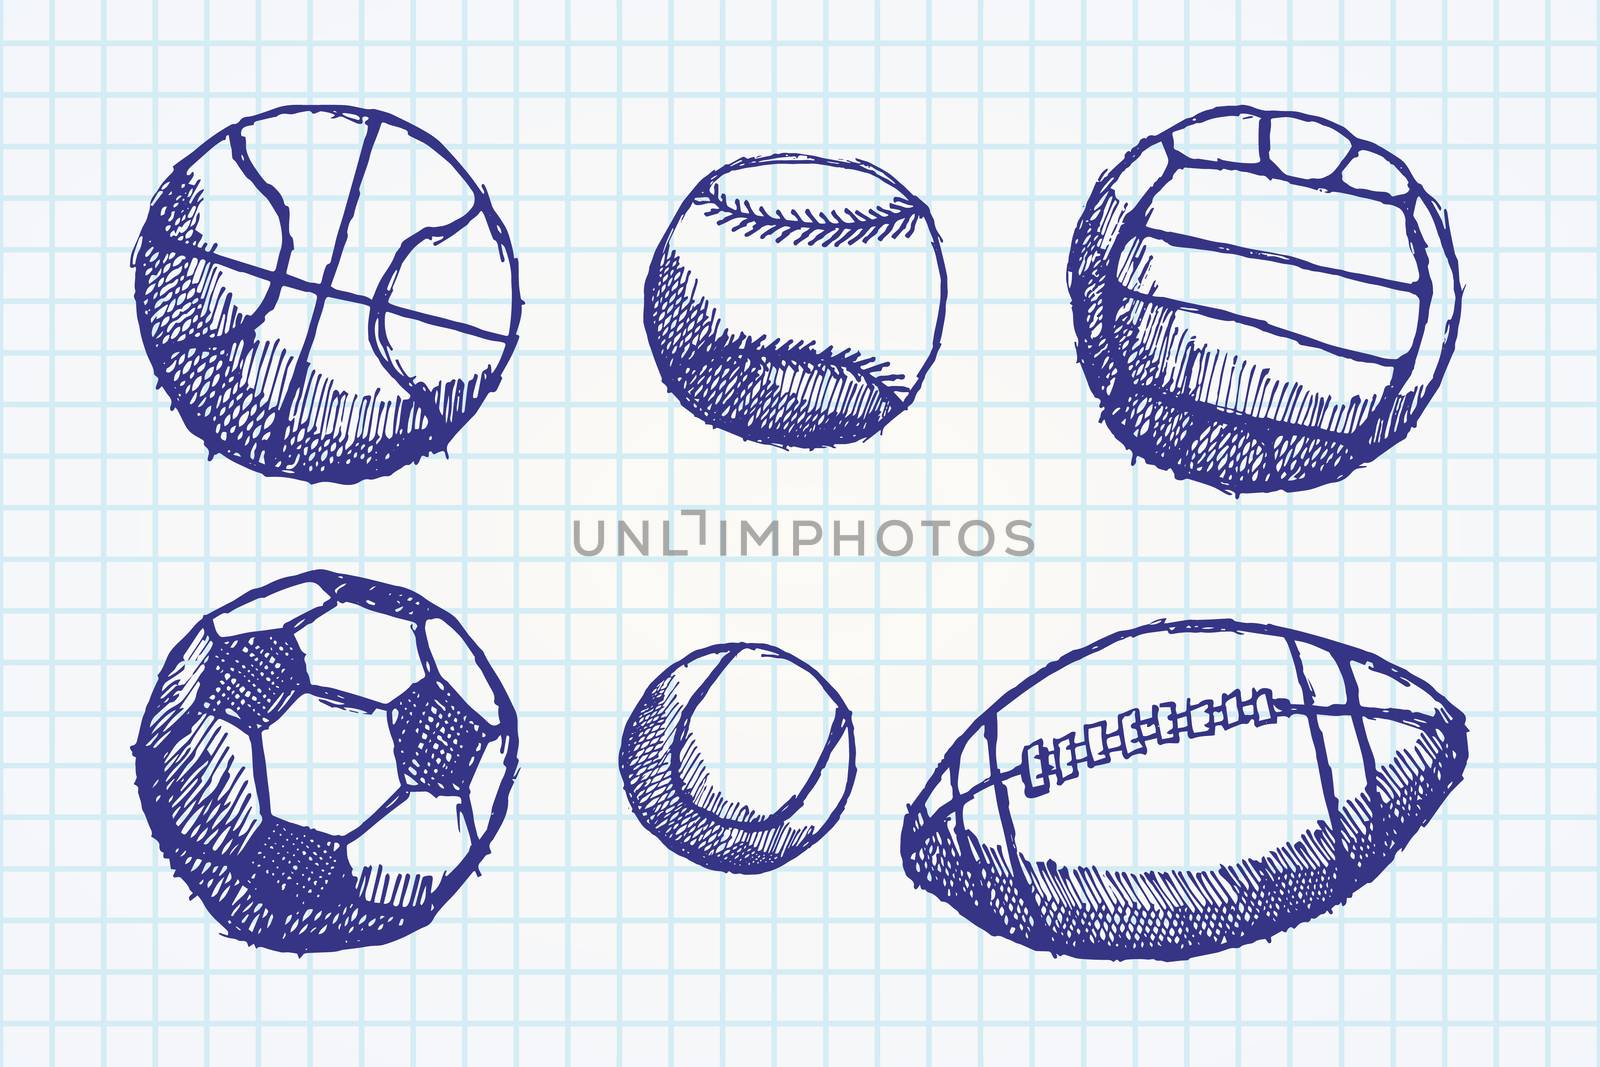 Ball sketch set with shadow on paper notebook.